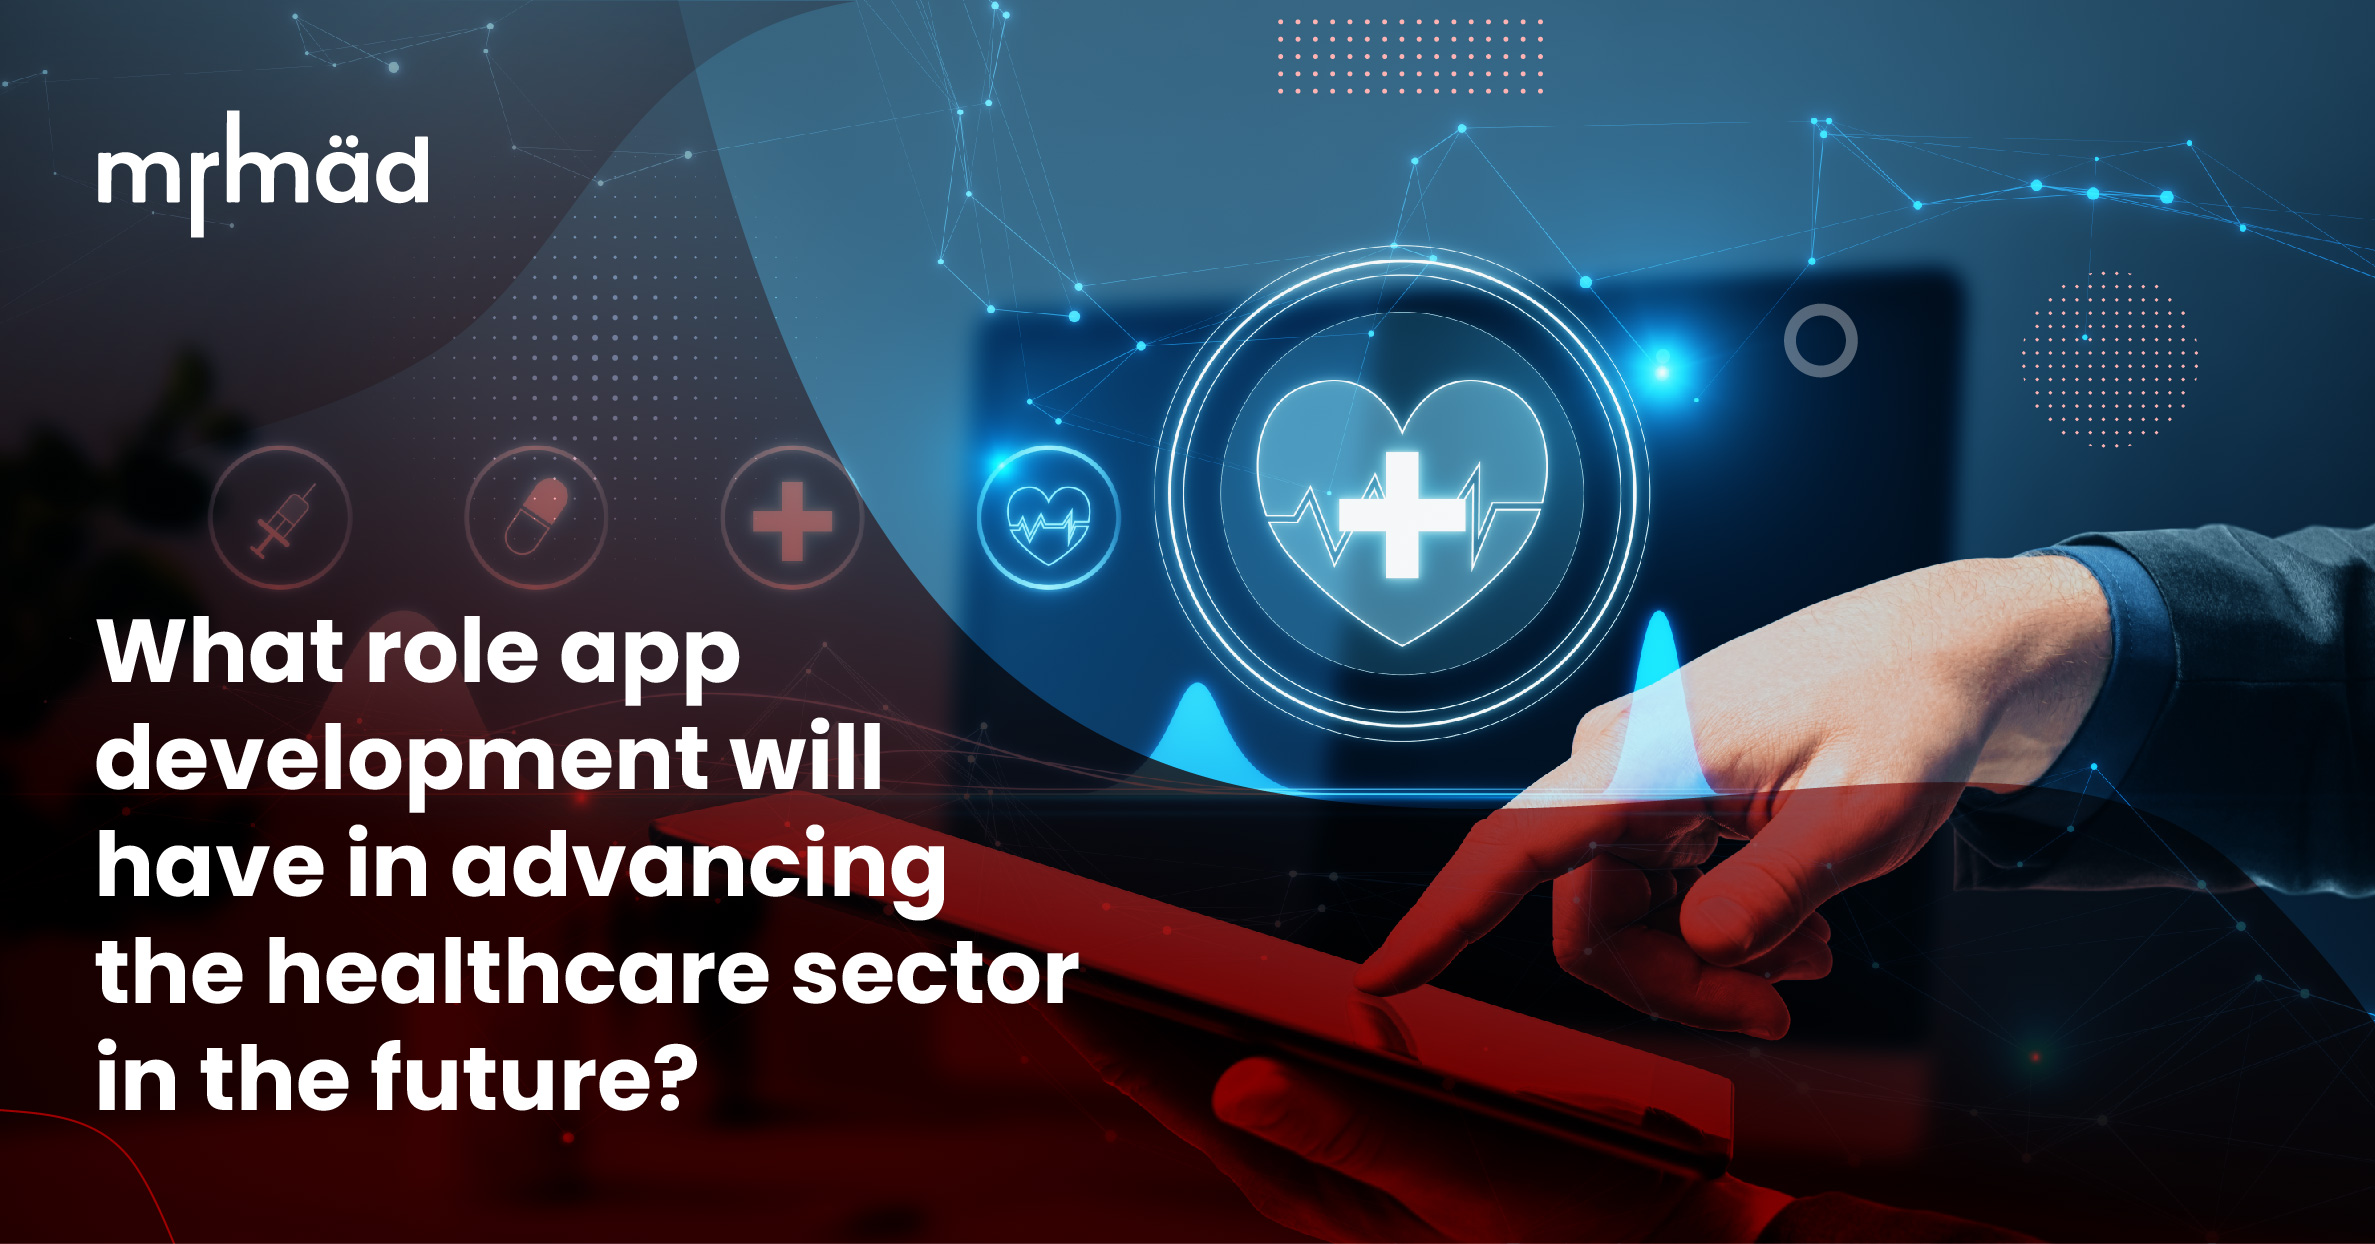 What role app development will have in advancing the healthcare sector in the future?